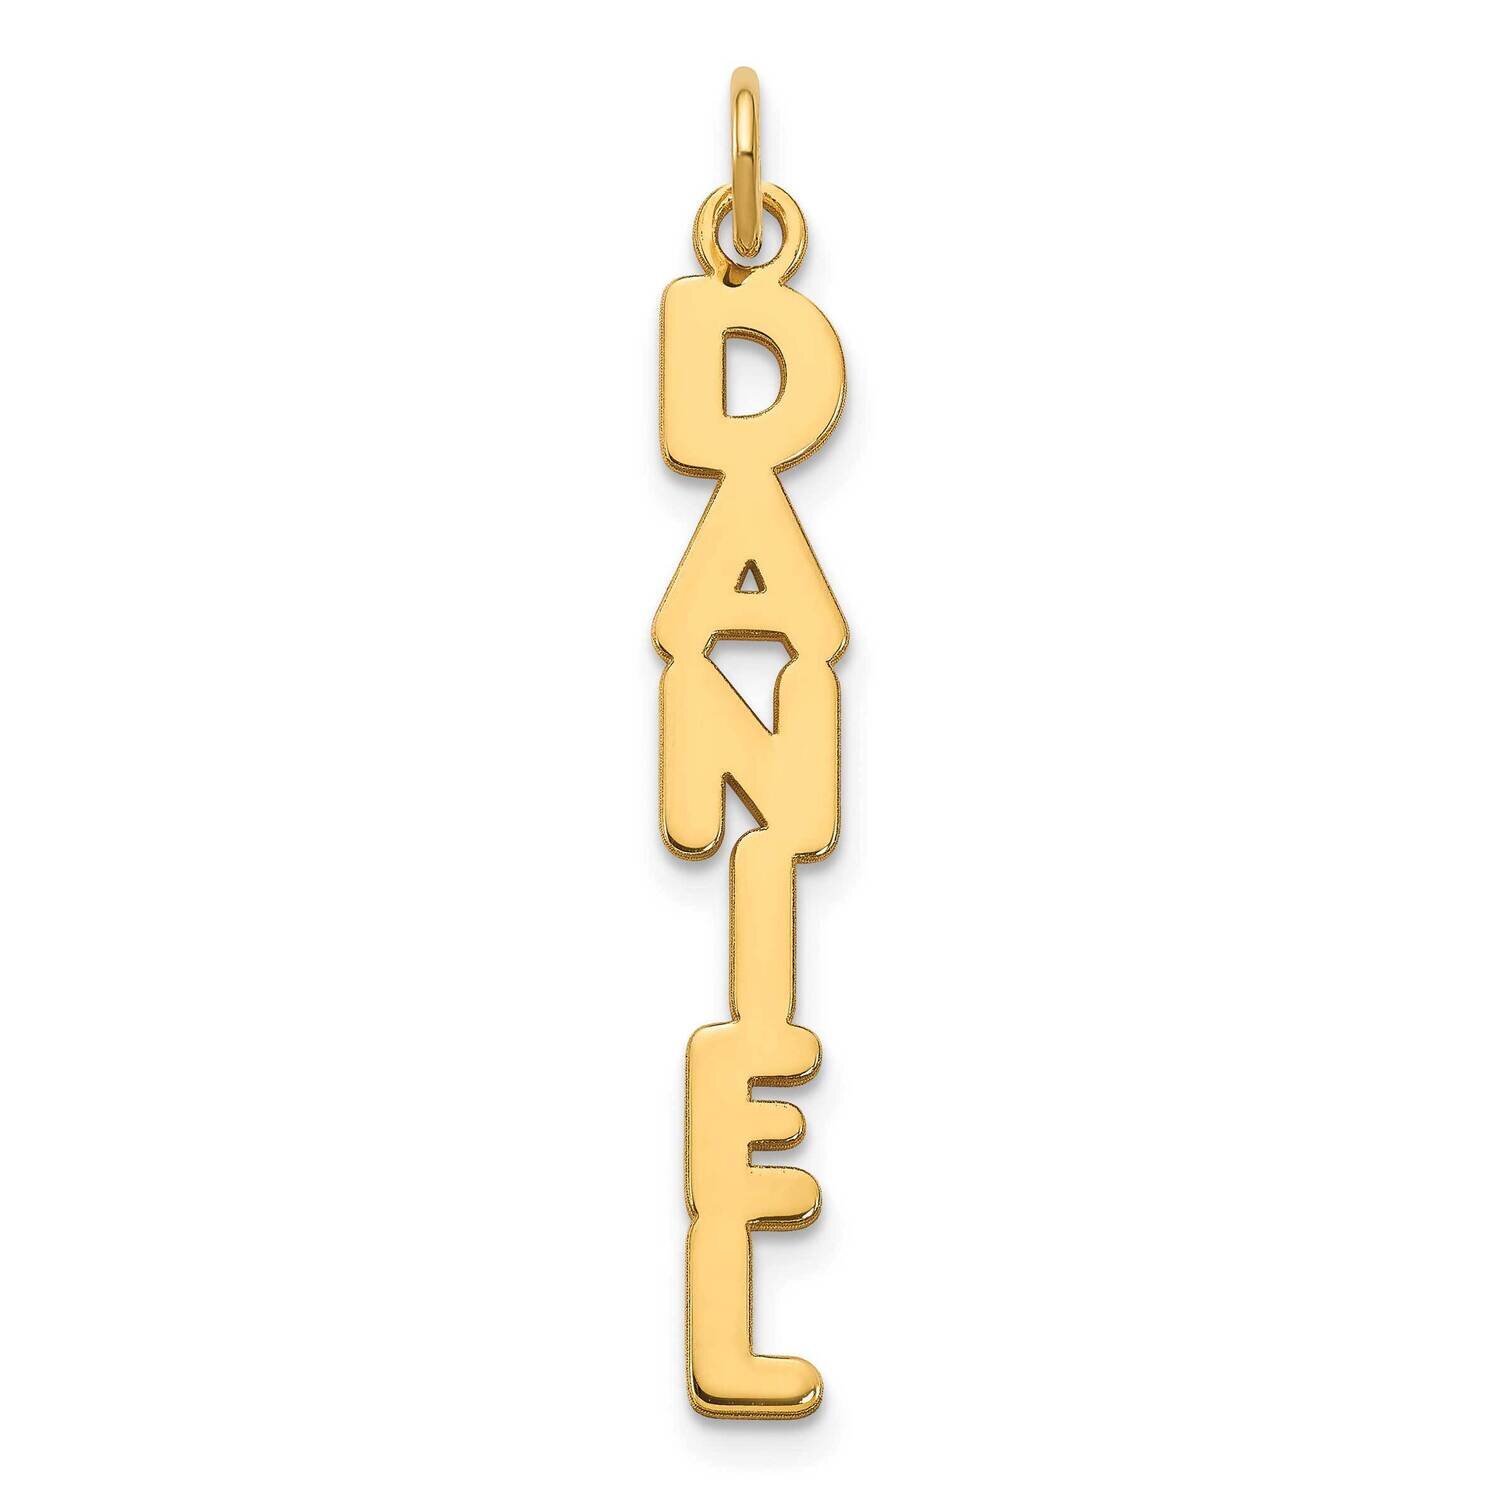 Kimberly Font Vertical Name Plate Charm Sterling Silver Gold-plated XNA1172GP